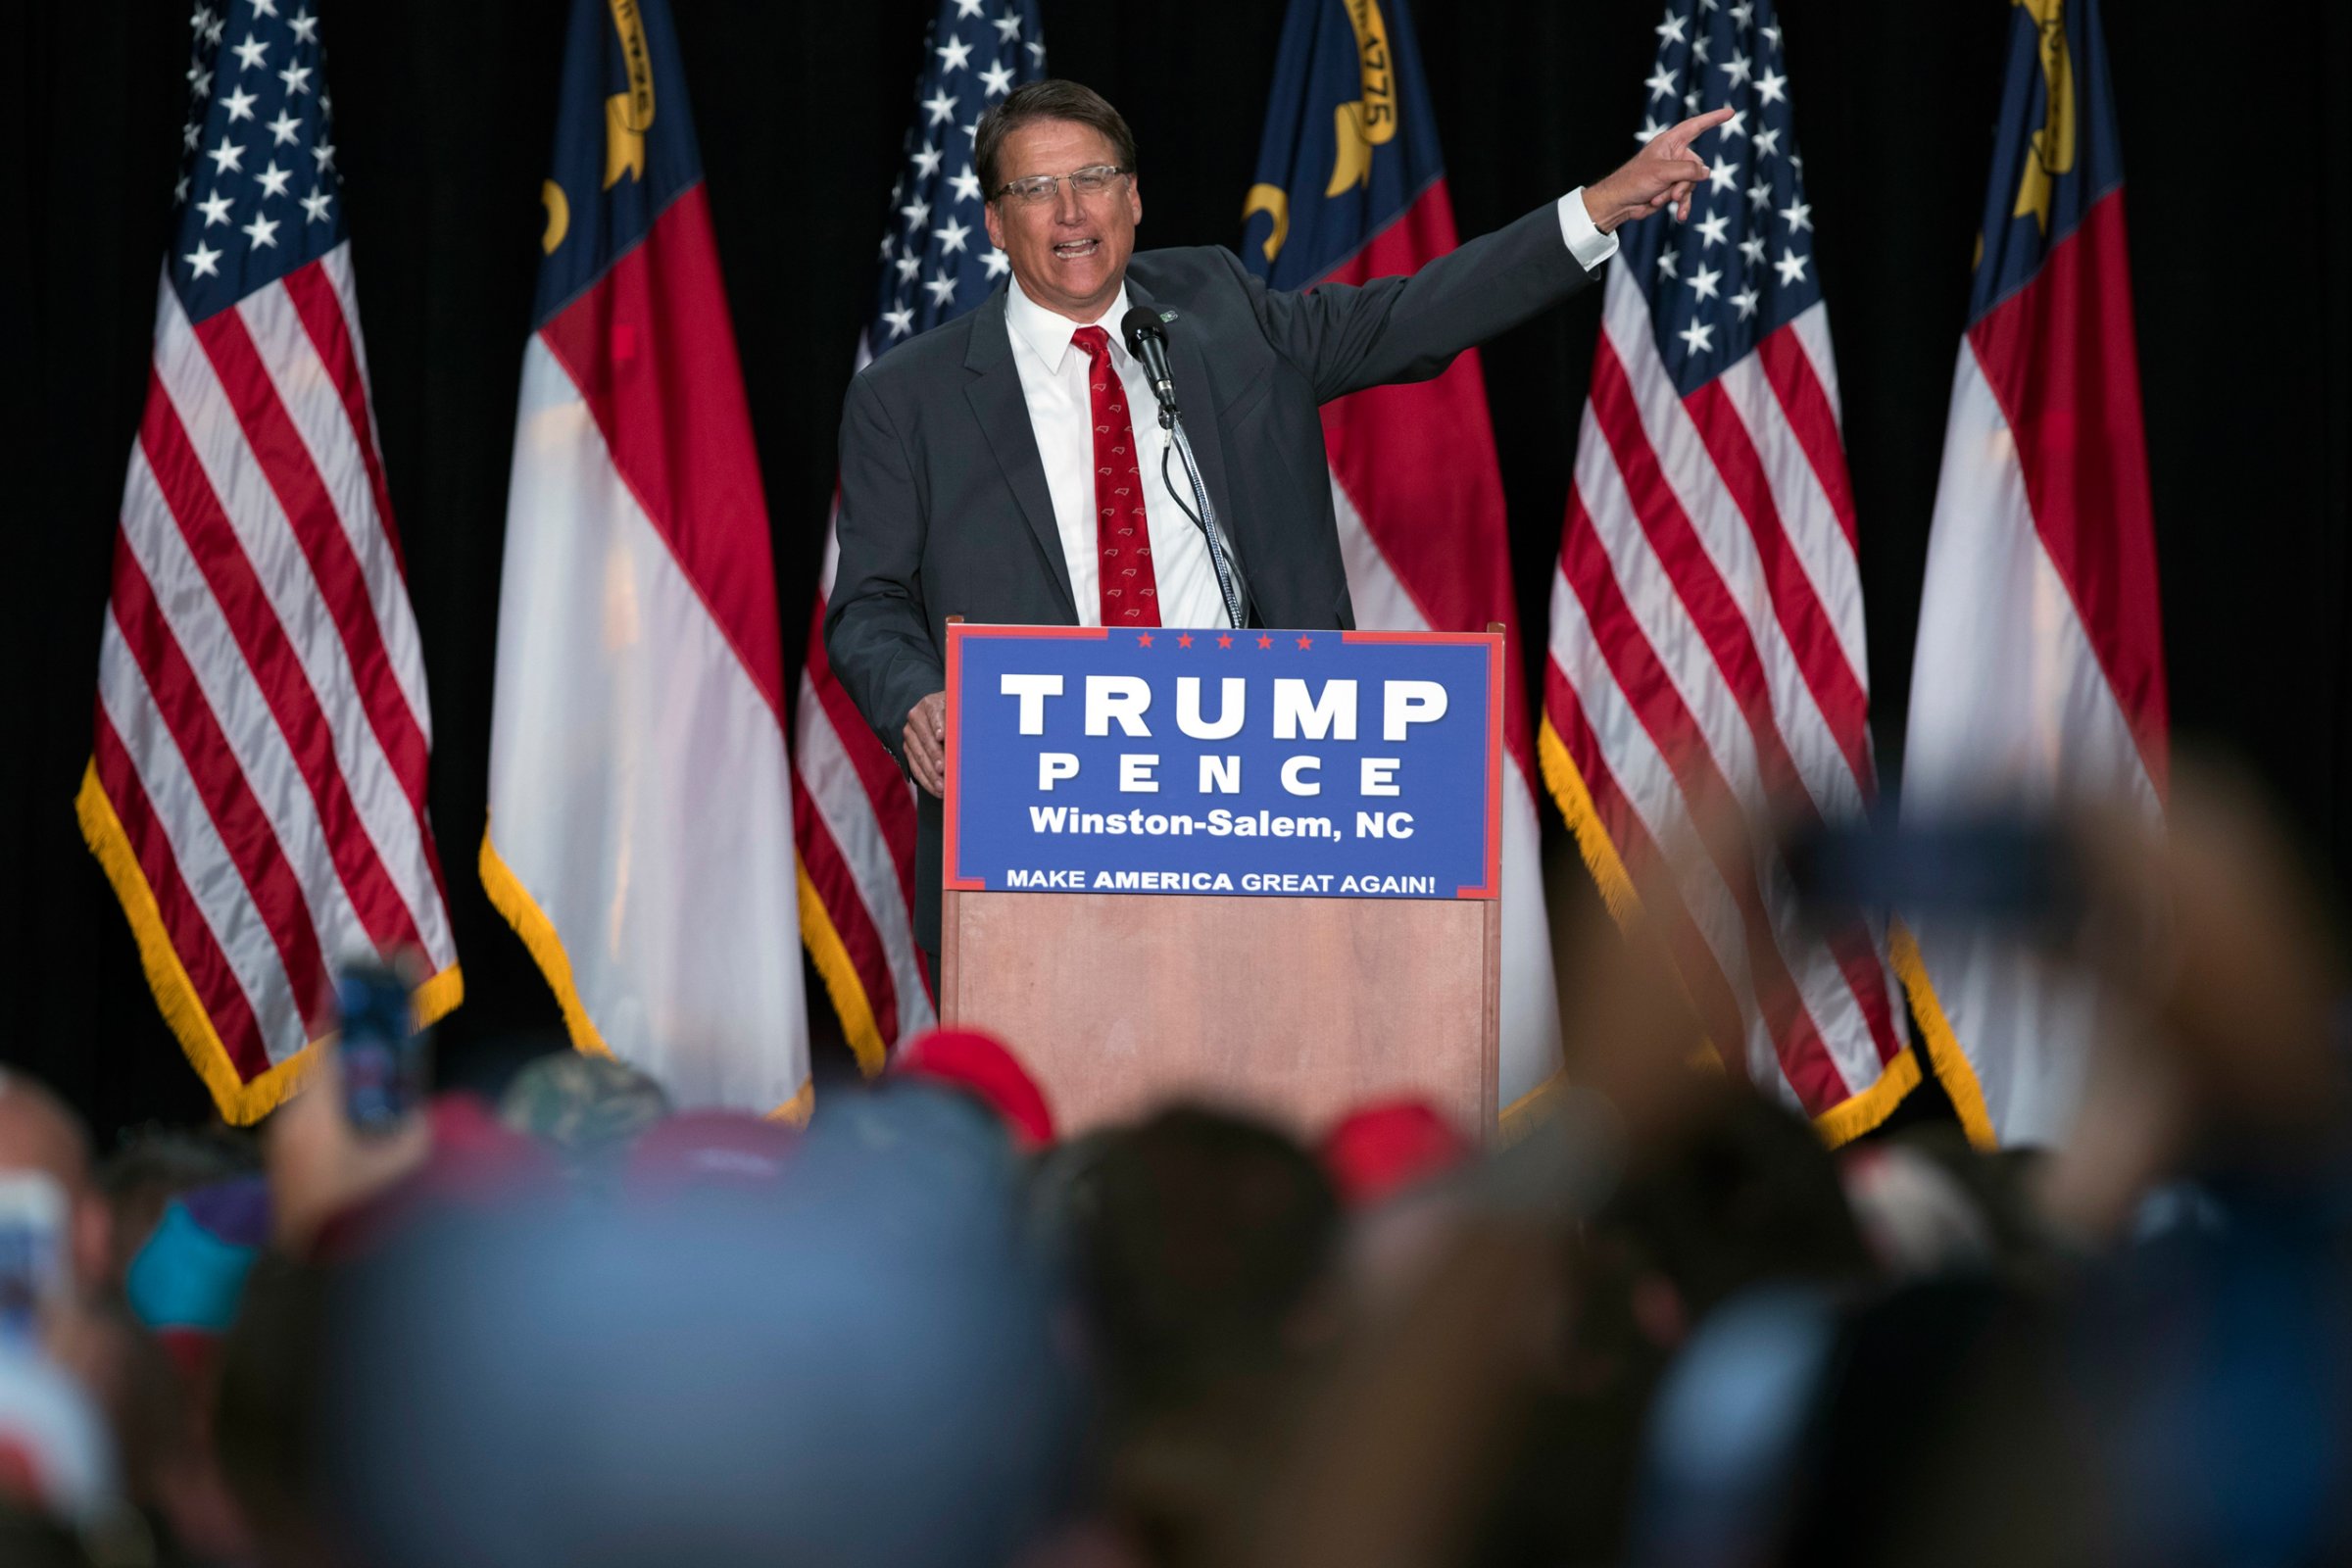 Gov. Pat McCrory, R-N.C., speaks during a campaign rally supporting Republican presidential candidate Donald Trump, Monday, July 25, 2016, in Winston-Salem, N.C. (AP Photo/Evan Vucci)